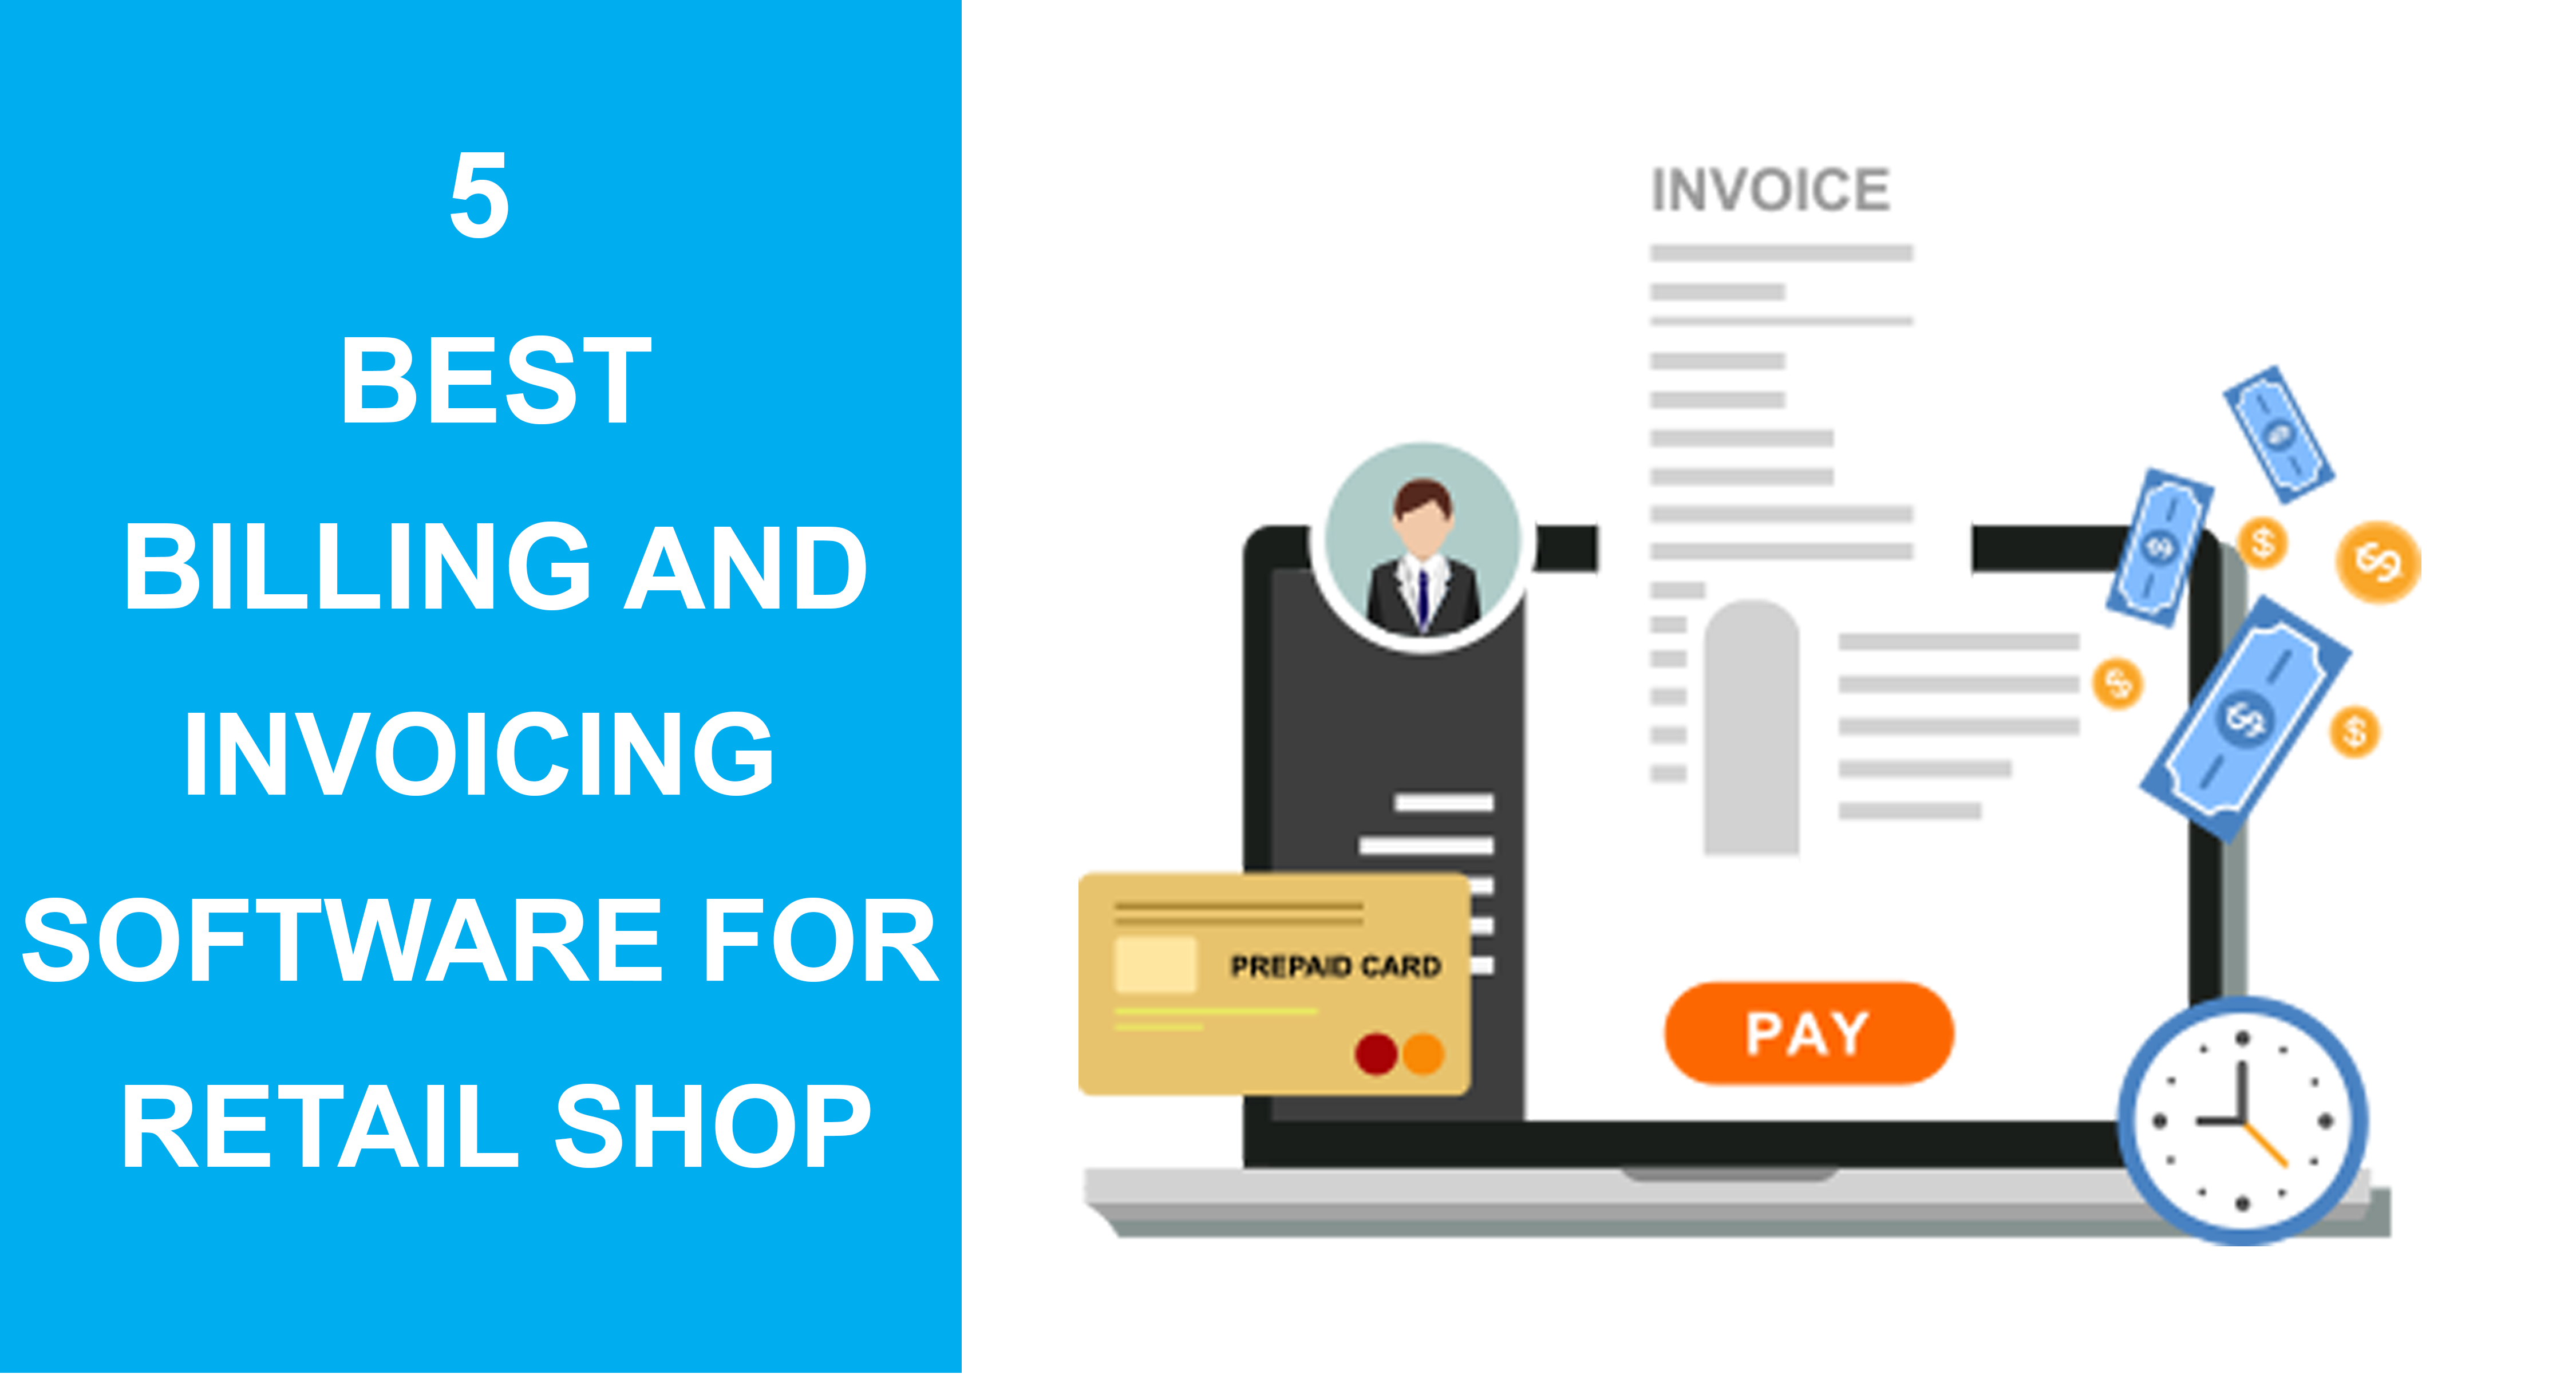 5 Best Billing And Invoicing Software For Retail Shop